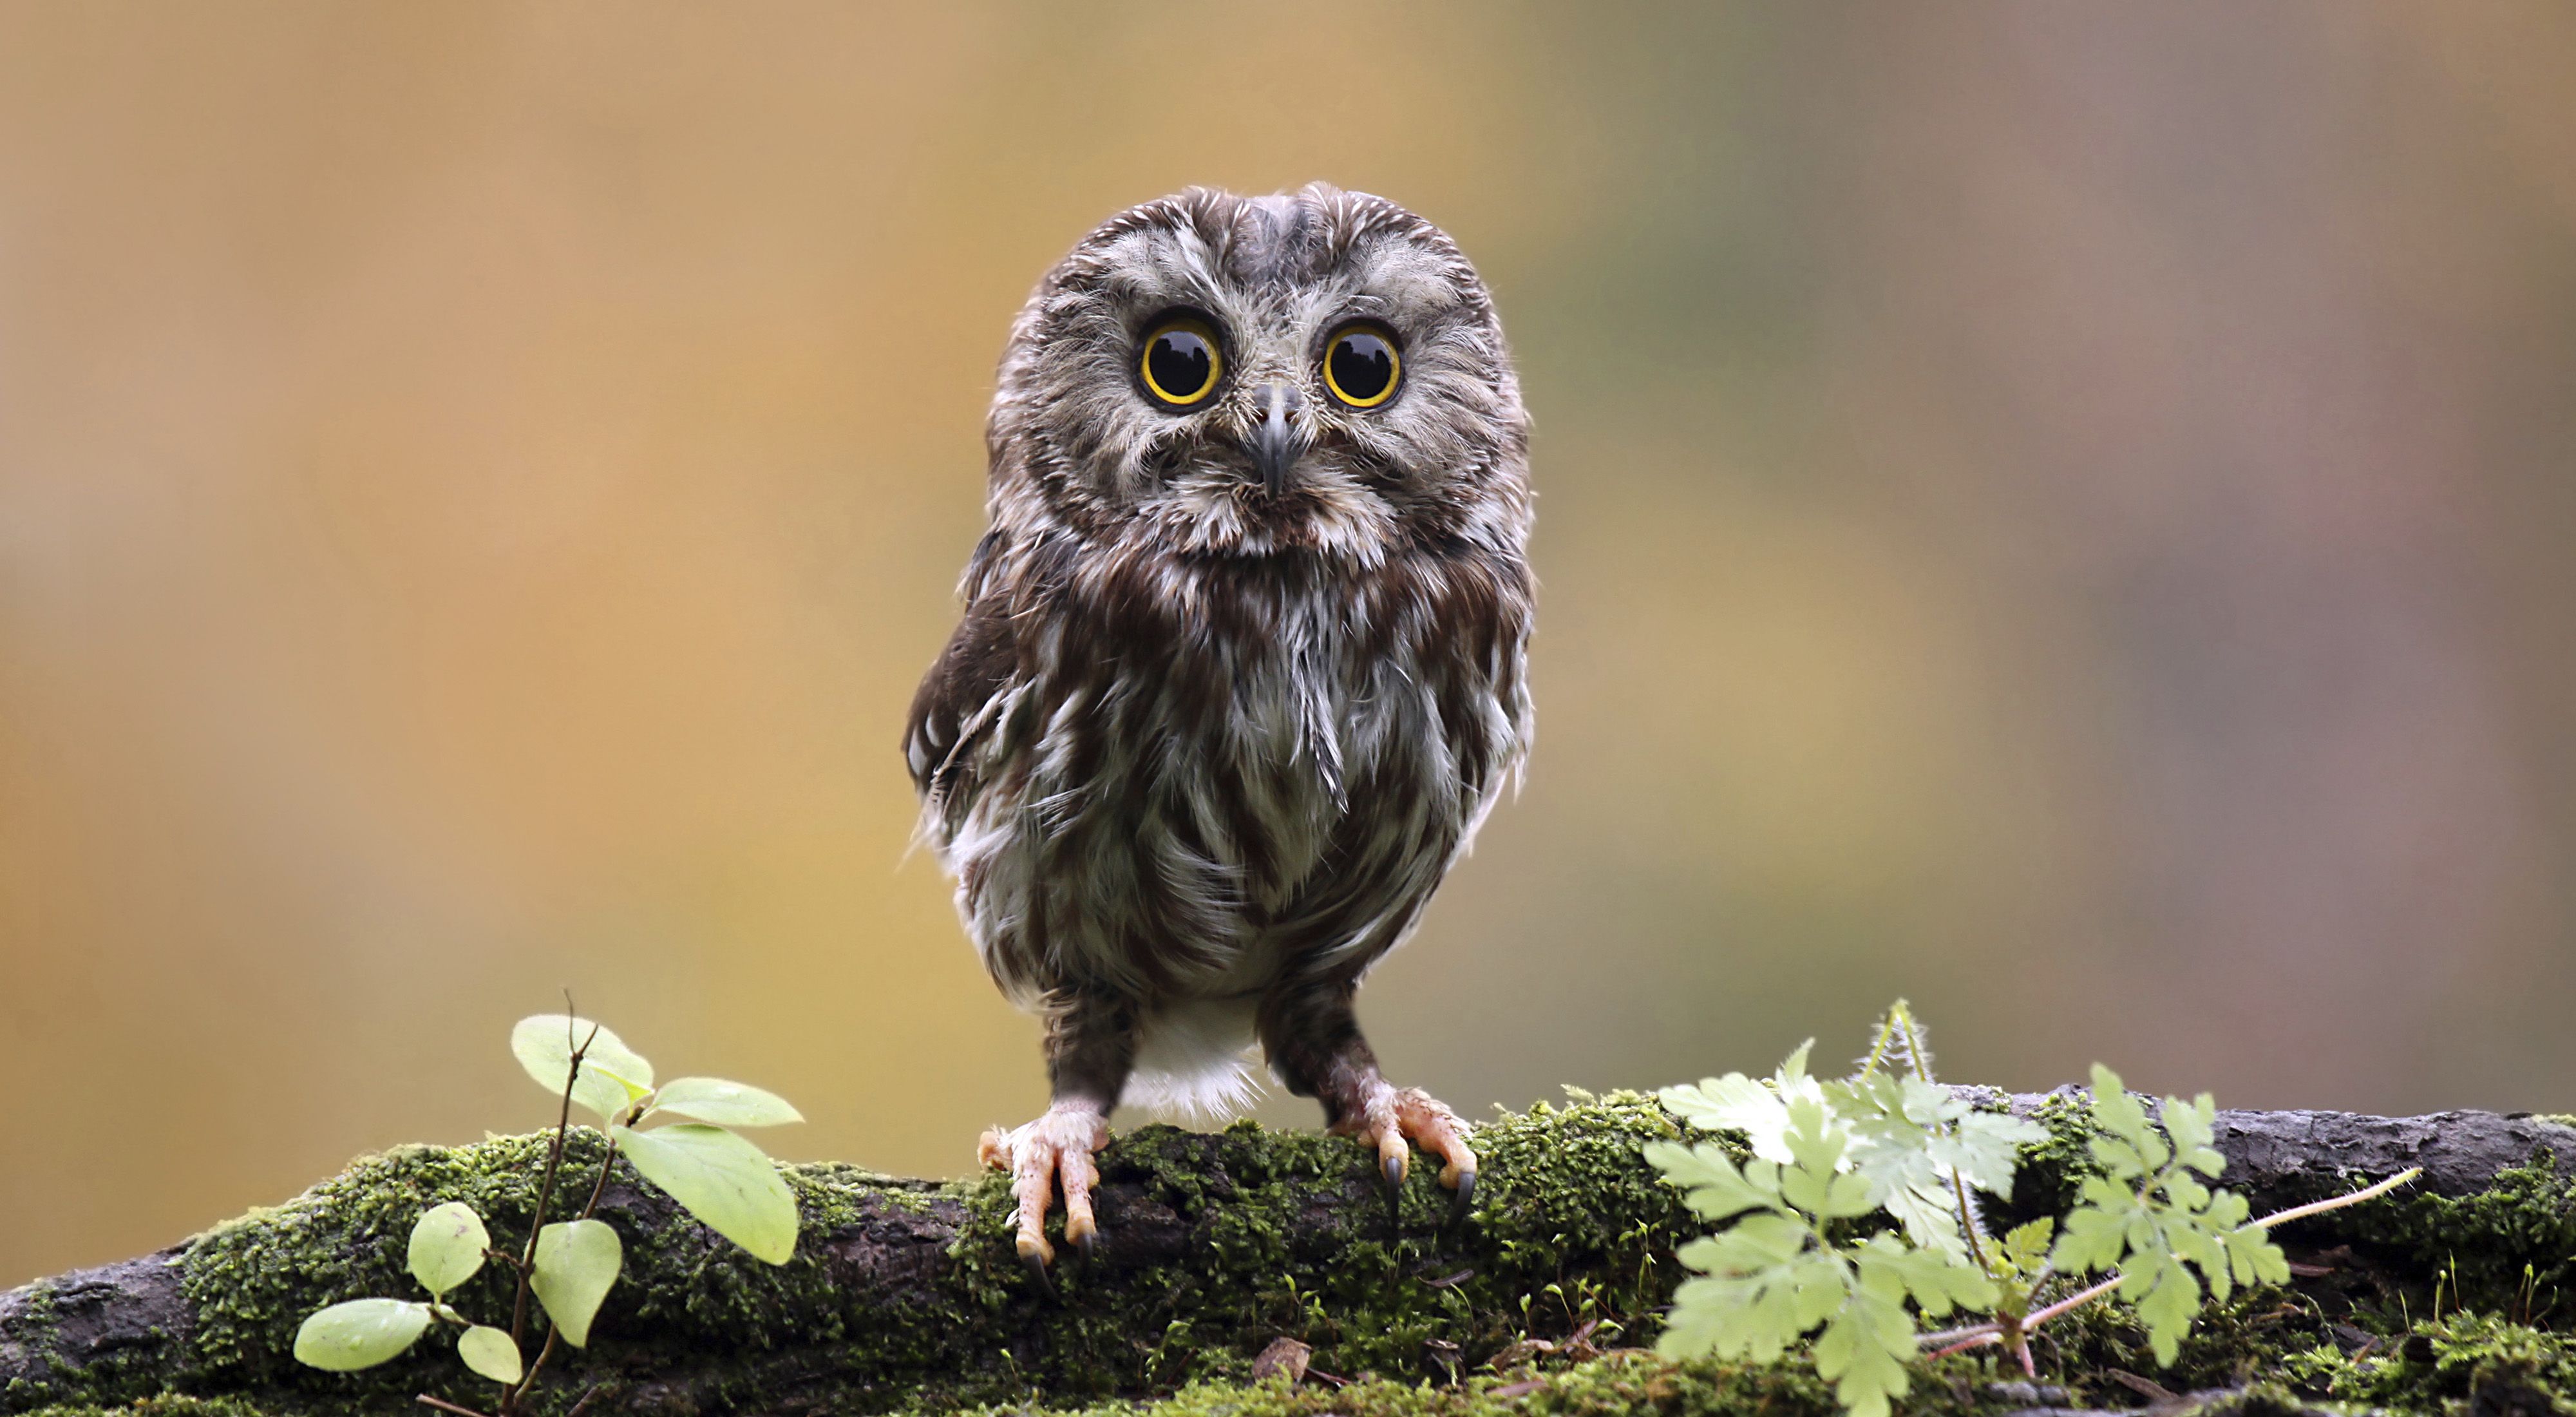 small owl with big eyes on a branch